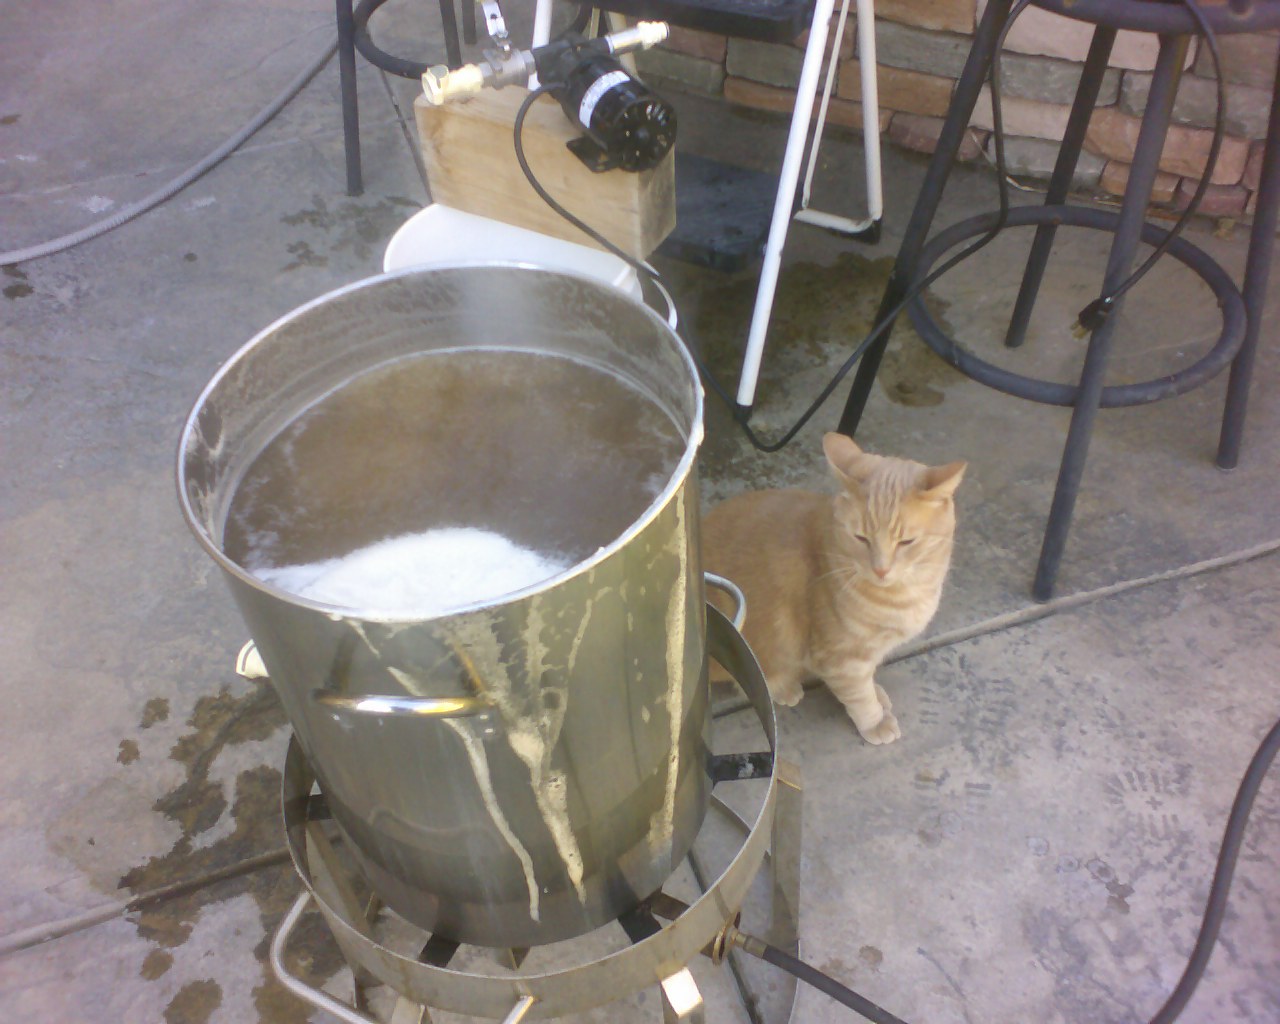 Otis is making sure there is not a boil-over.
